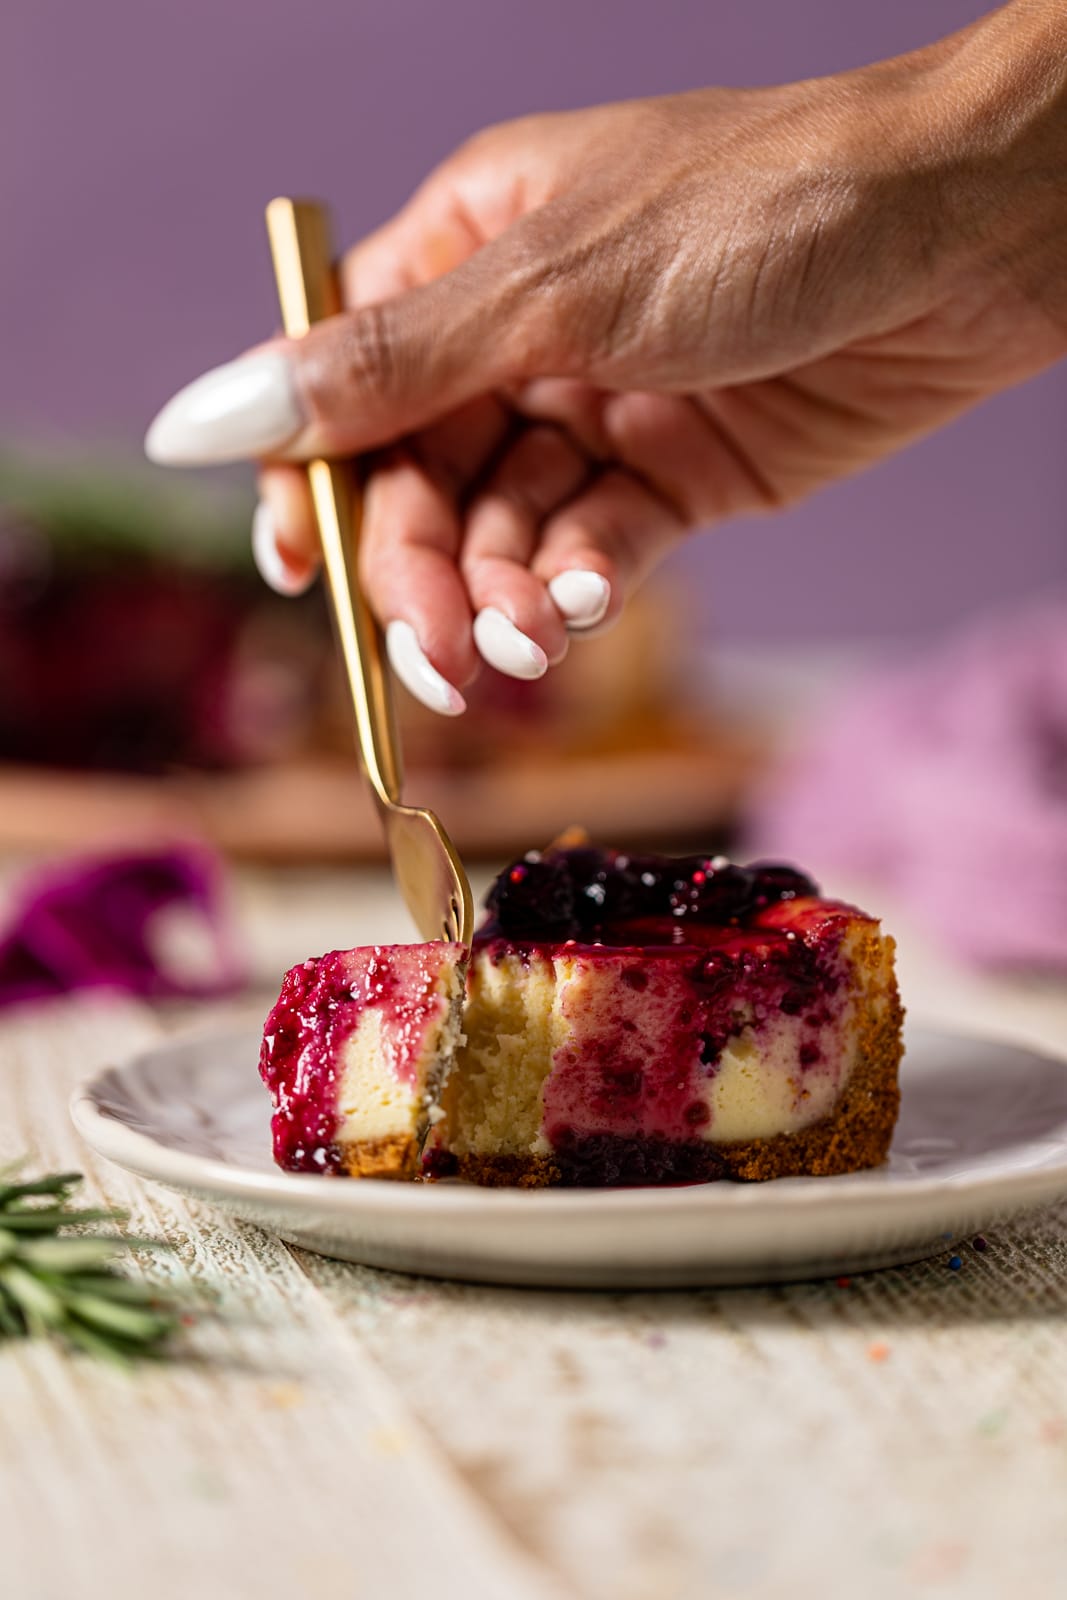 Hand using a fork to take a piece from a slice of Lemon Blueberry Cheesecake